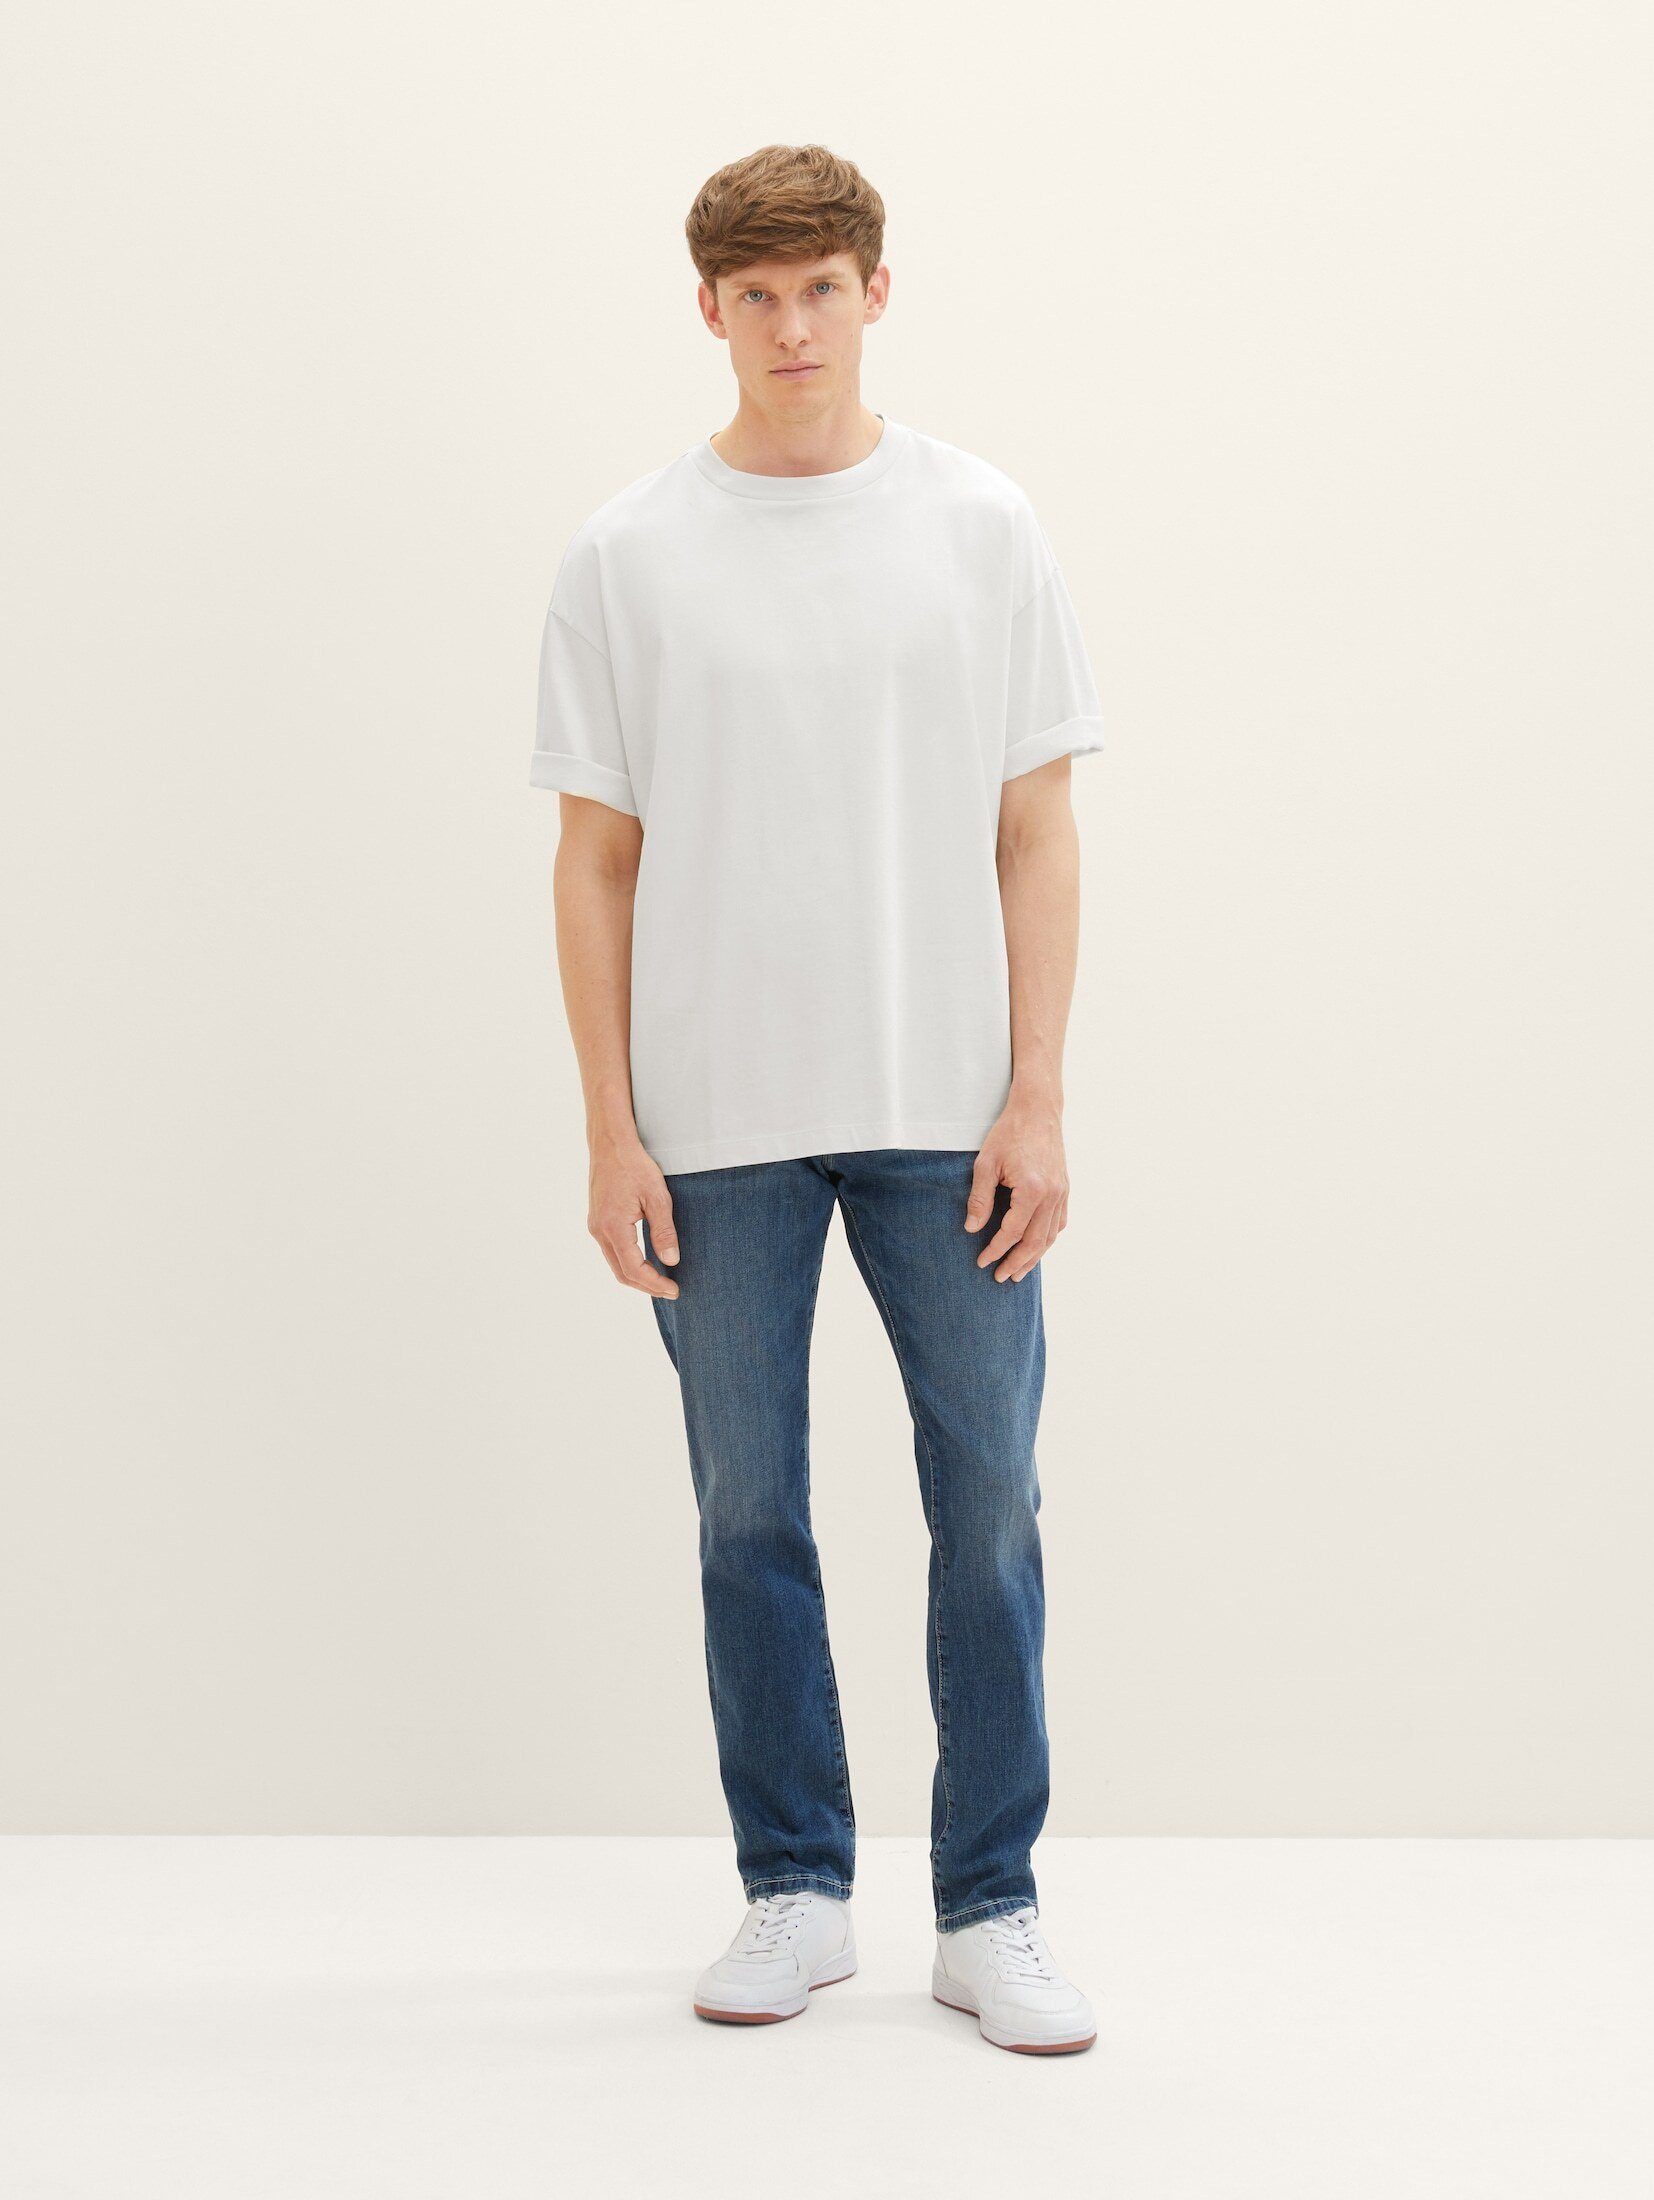 TOM TAILOR Straight-Jeans Josh Jeans mid stone wash denim | Straight-Fit Jeans